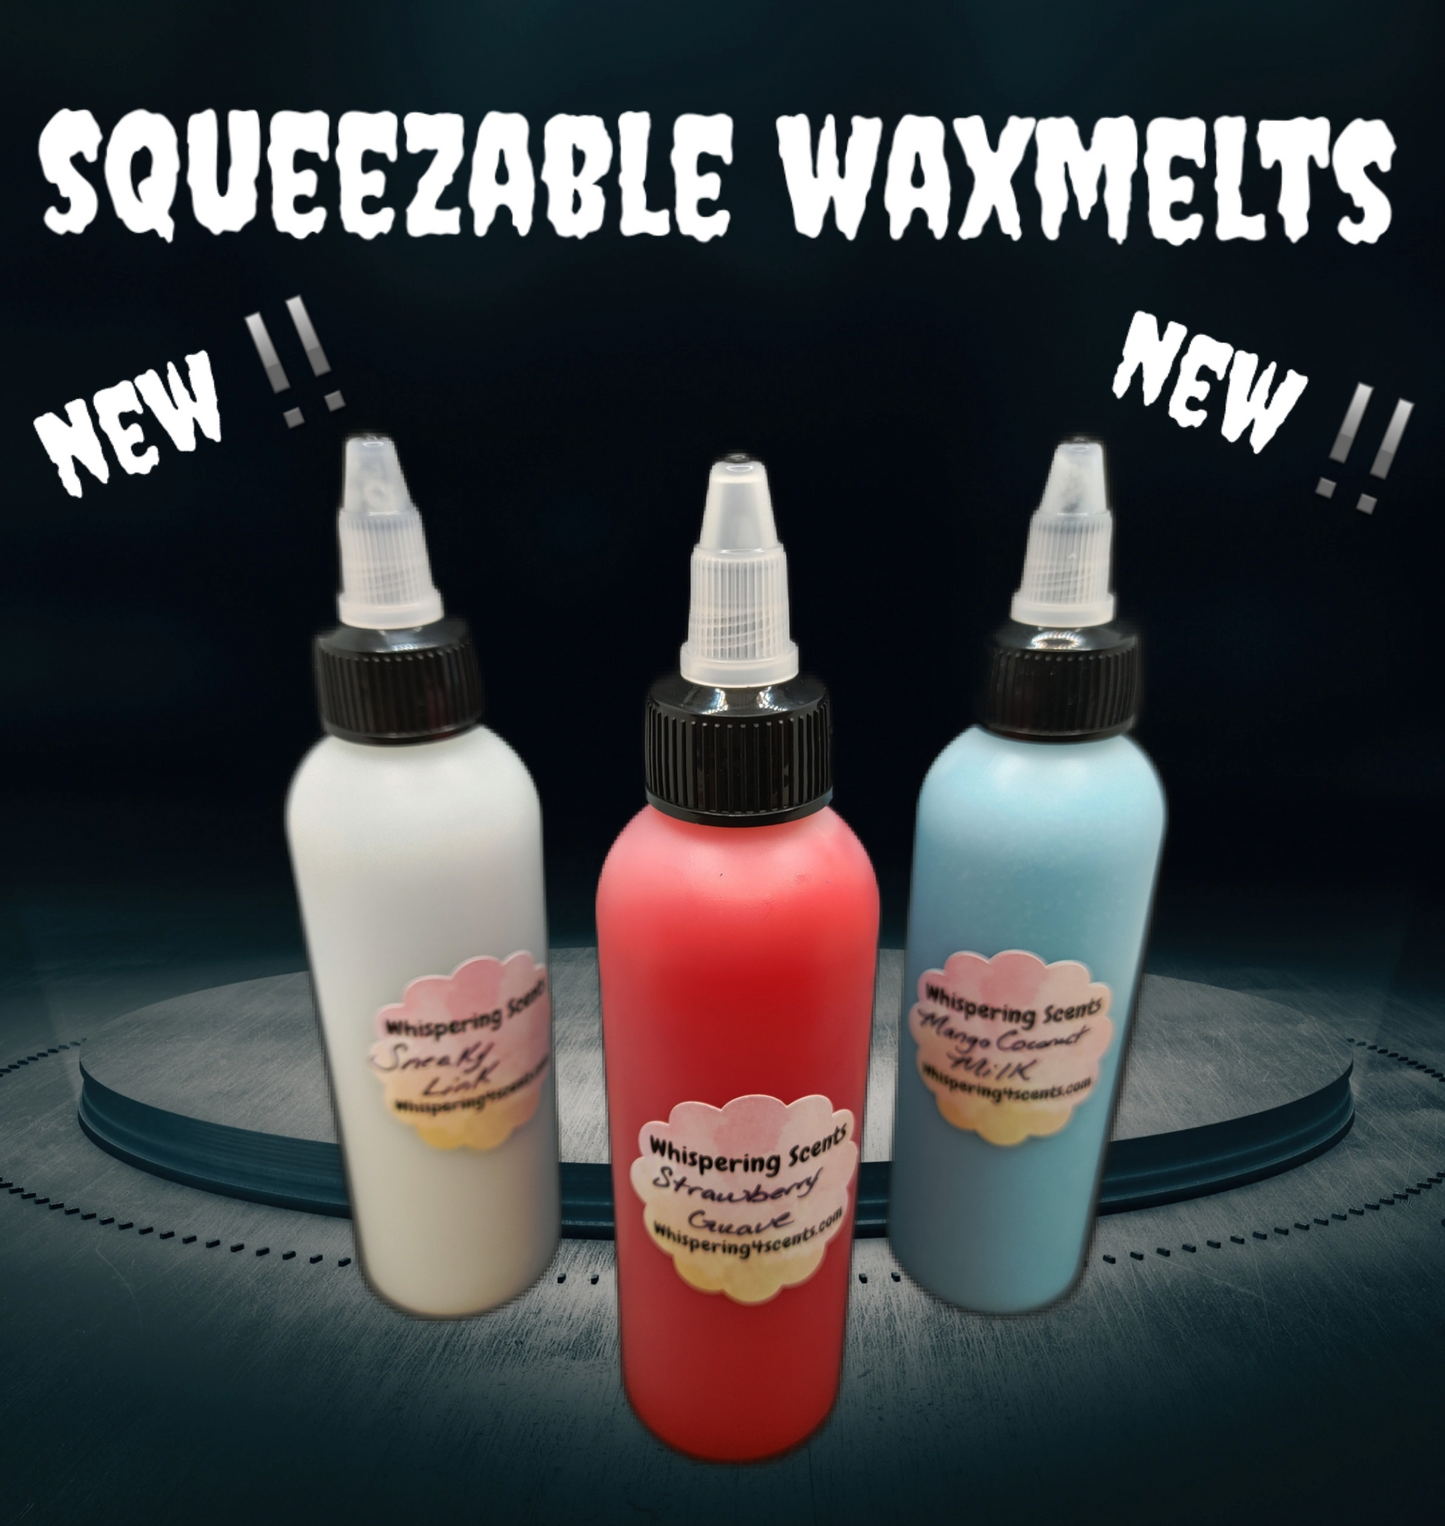 Waxmelts Squeezable